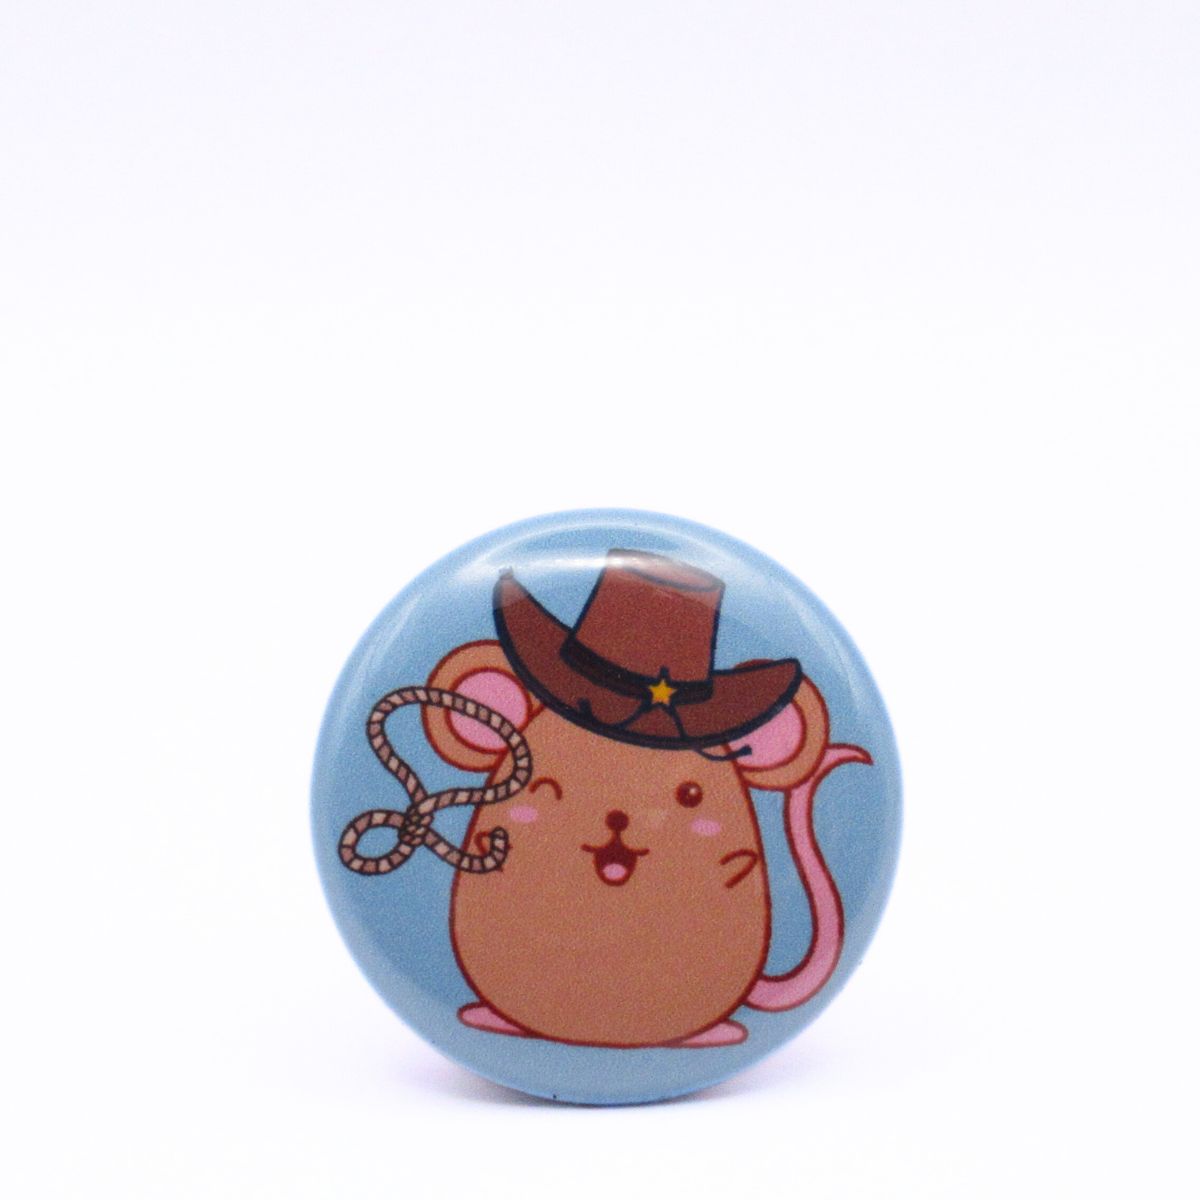 BooBooRoo Pinback Button (i.e. button, badge, pin) displaying a mouse with a cowboy hat and lasso.